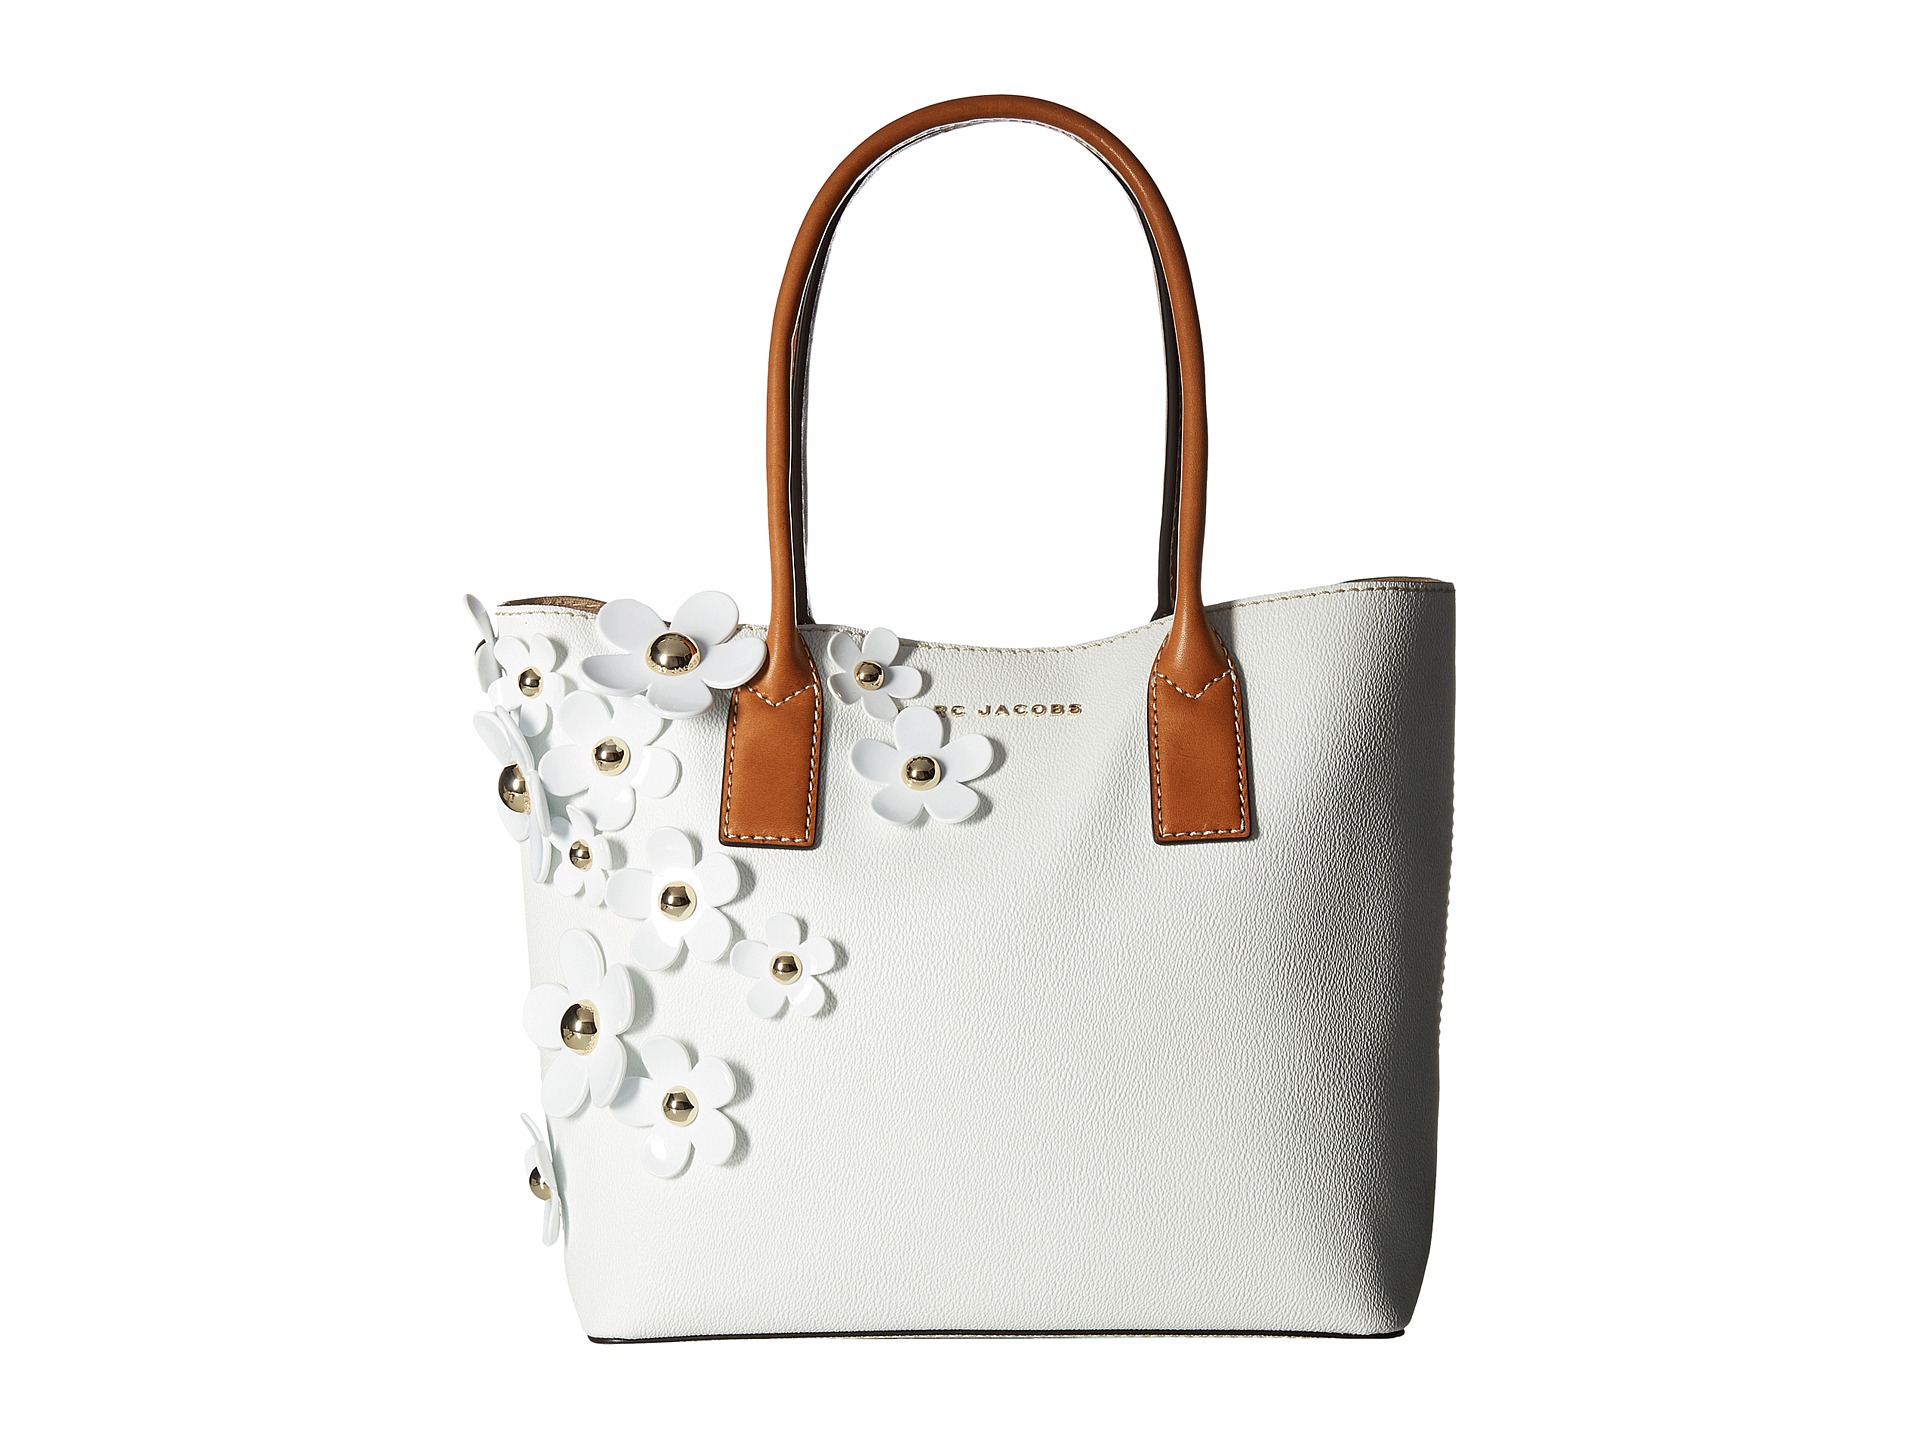 Marc Jacobs The Daisy Tote at Zappos.com